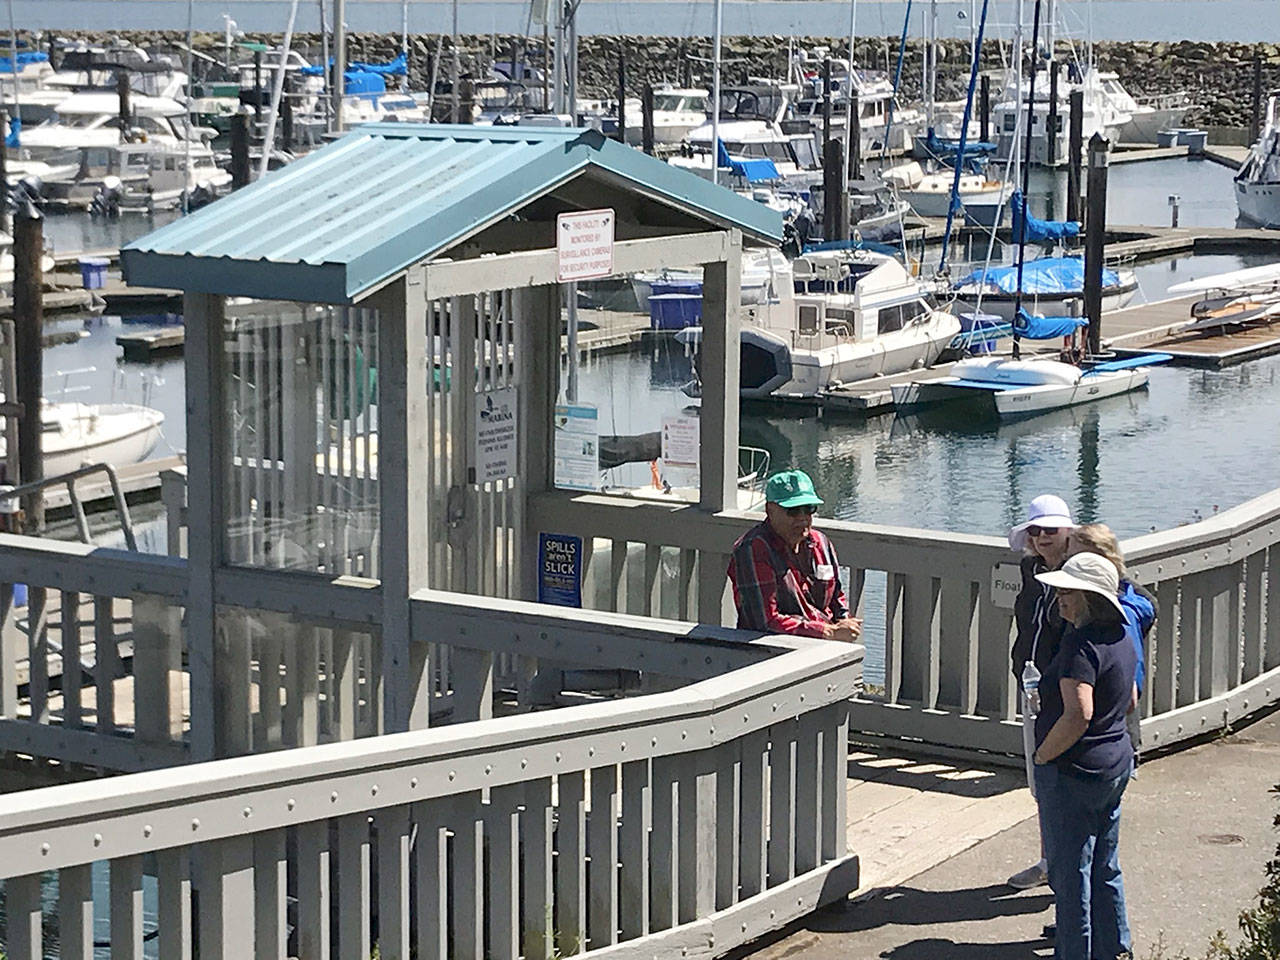 Critics of plans to consider selling John Wayne Marina to a private buyer fear it would limit public access to the Port of Port Angeles-owned facility east of downtown Sequim. (Paul Gottlieb/Peninsula Daily News)